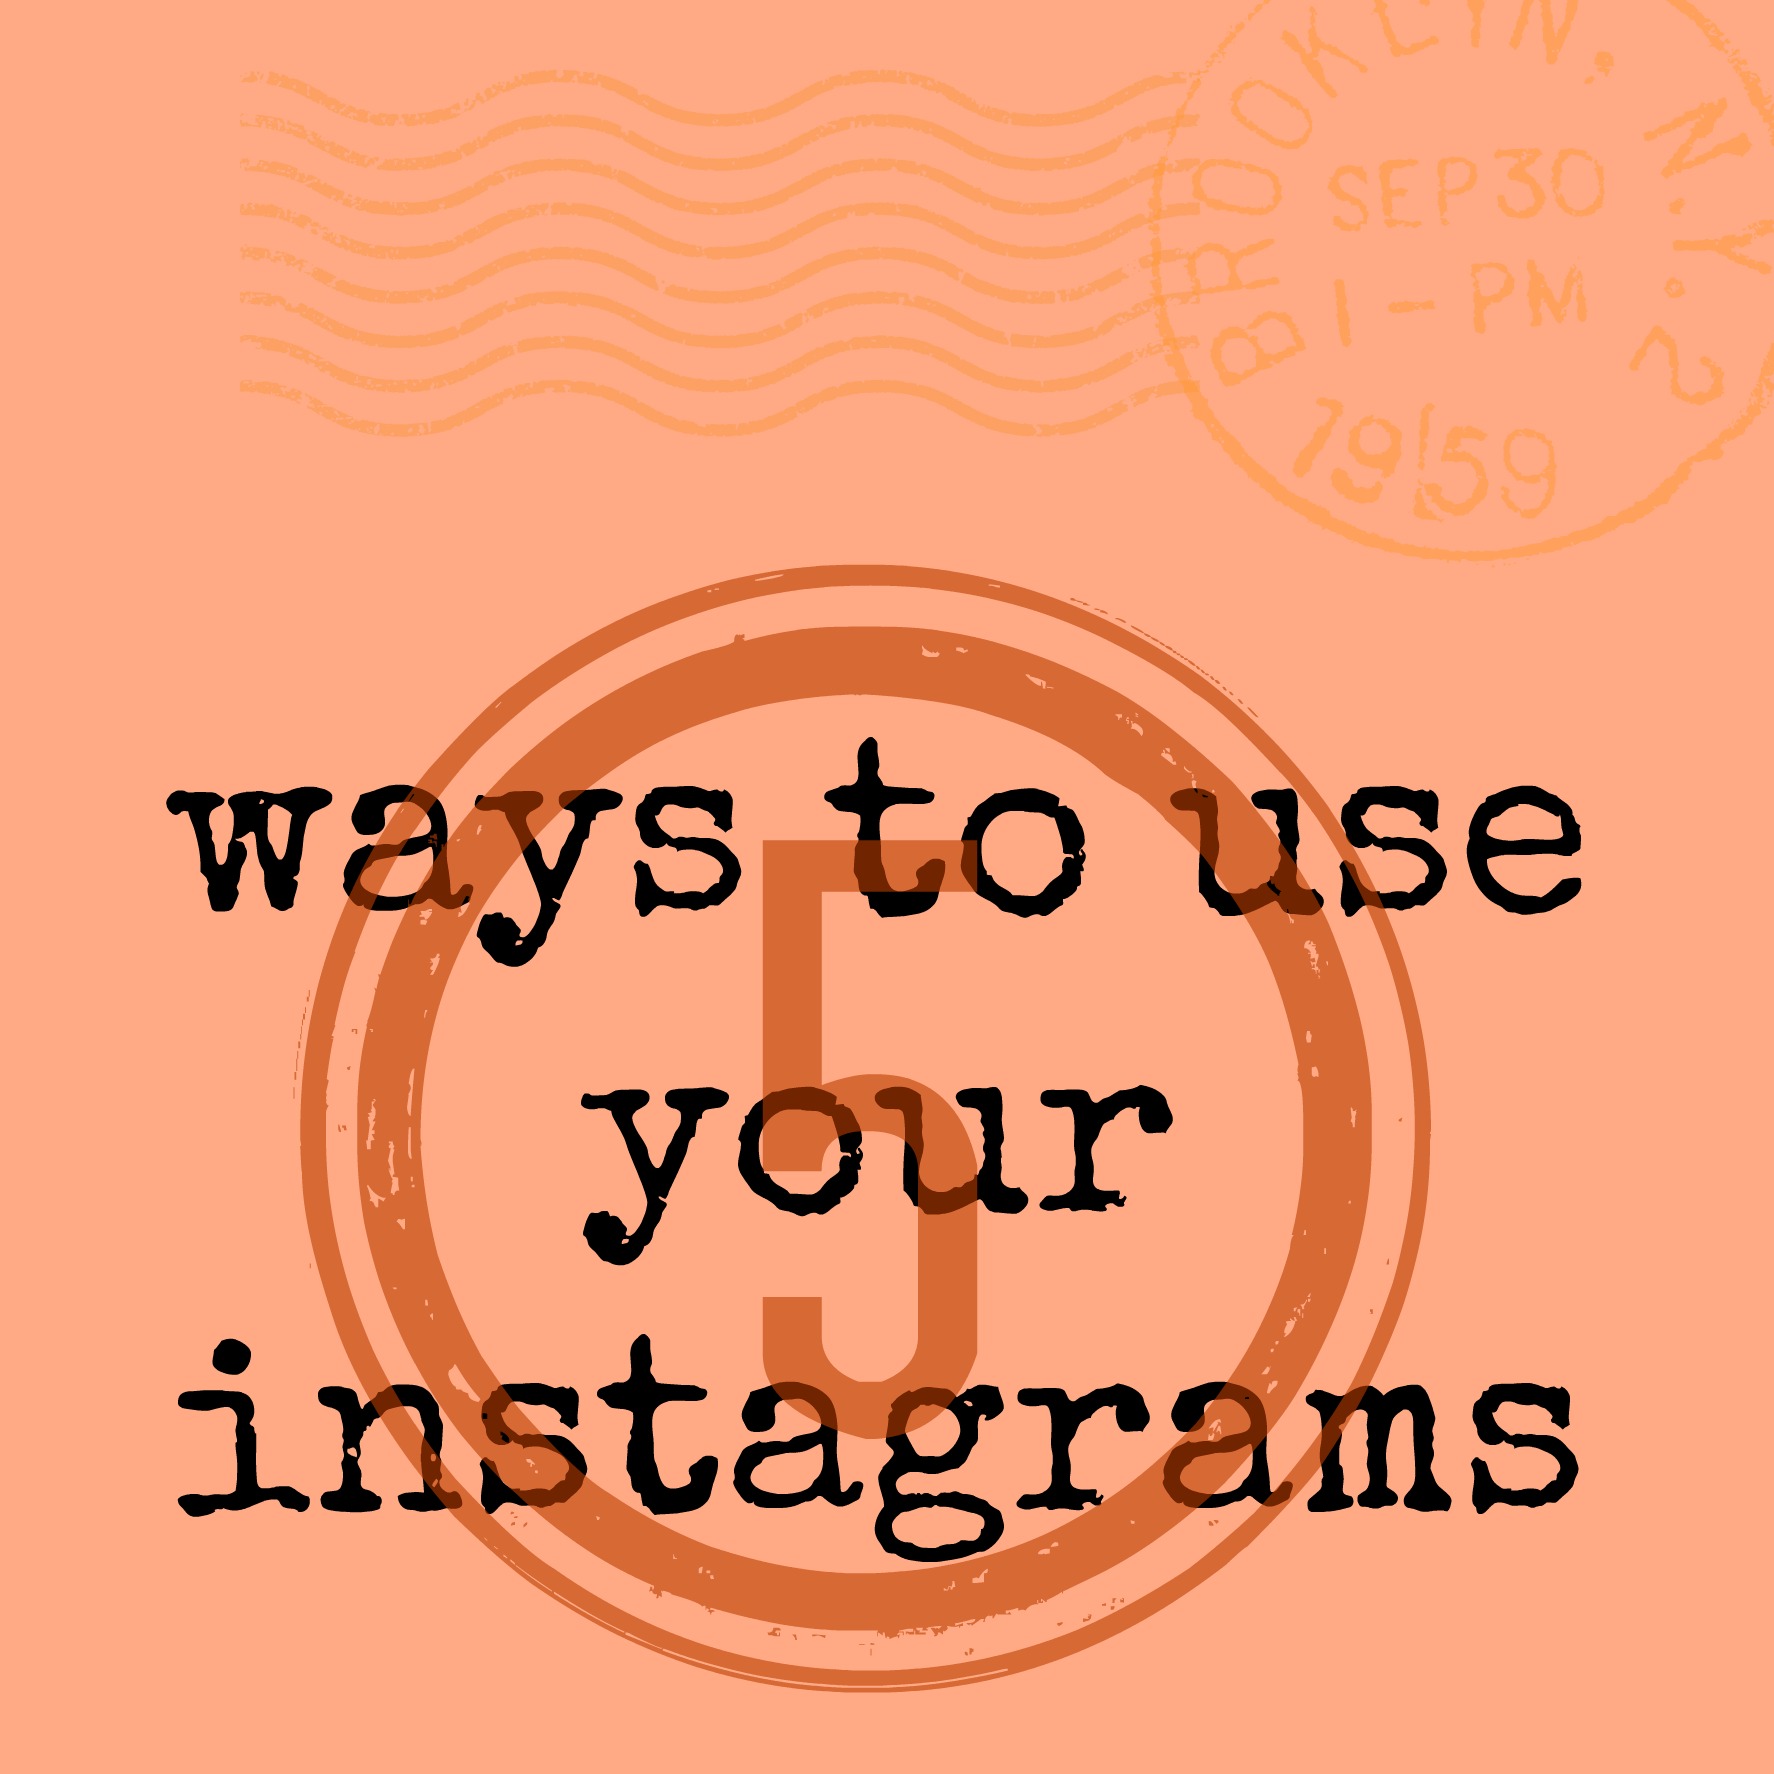 5 things to do with instagrams